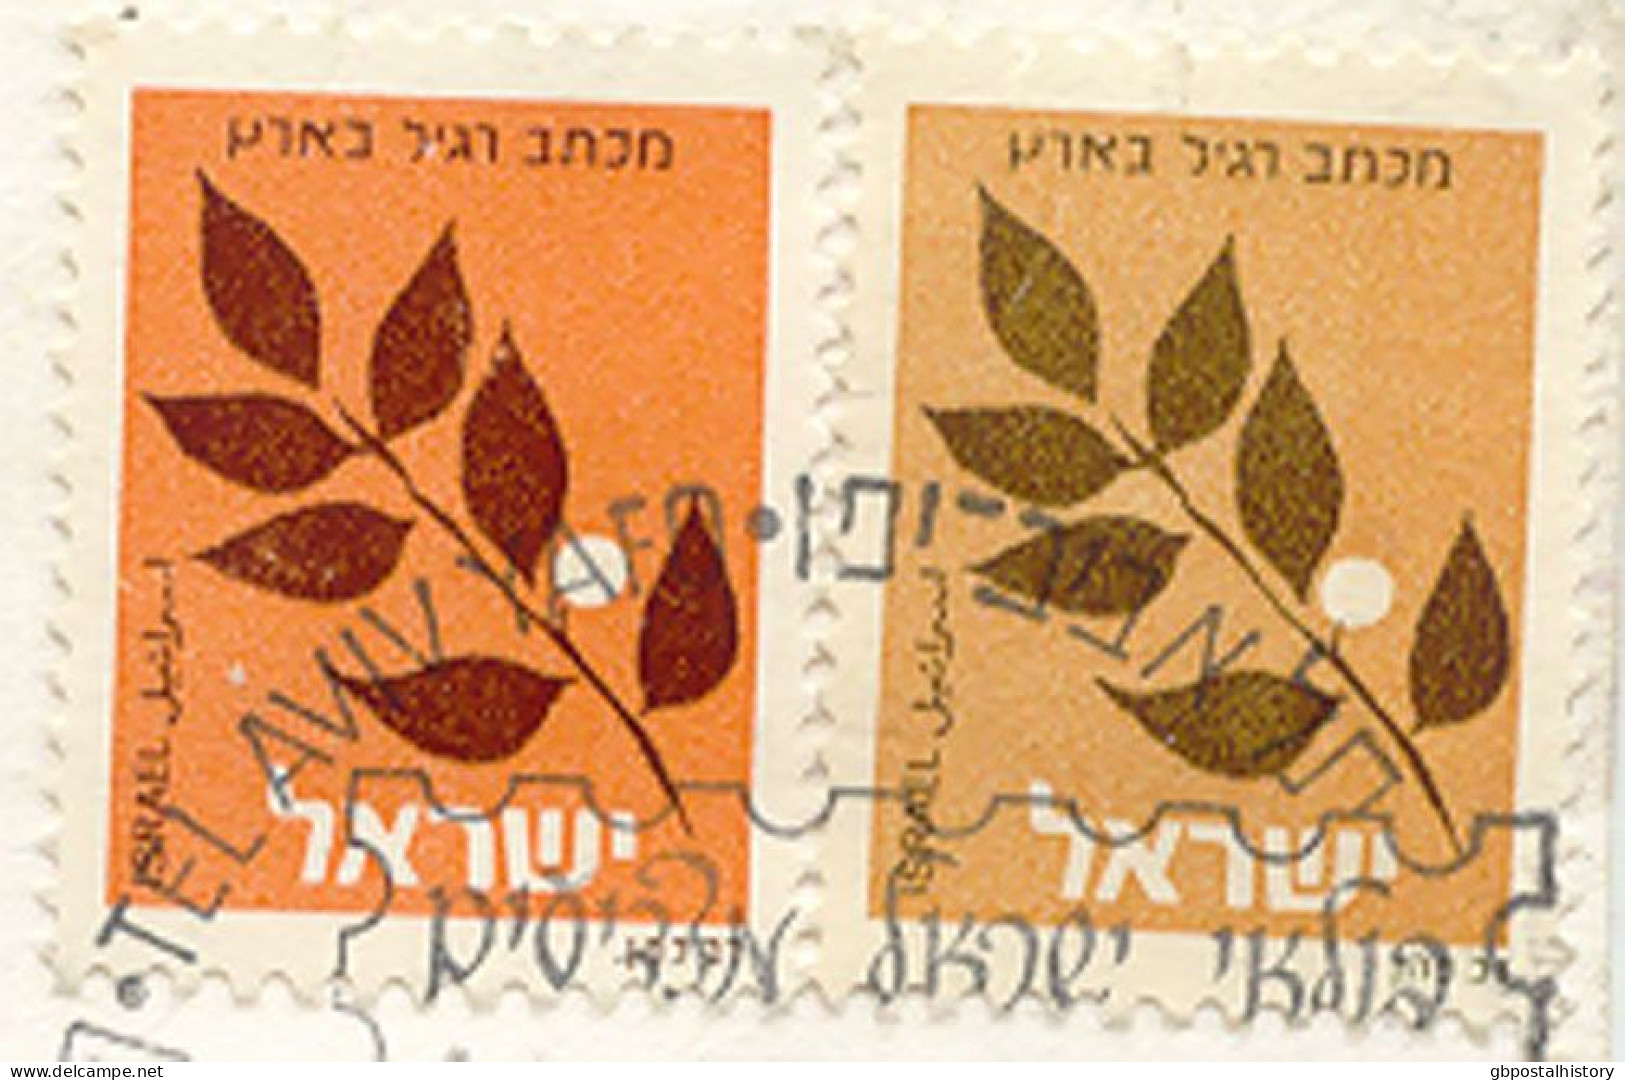 ISRAEL 1986 Branch Without Valuation 2 Times On Very Fine Cover With SST "AMERIPEX '86 22.5.1986", MAJOR ERROR & VARIETY - Storia Postale